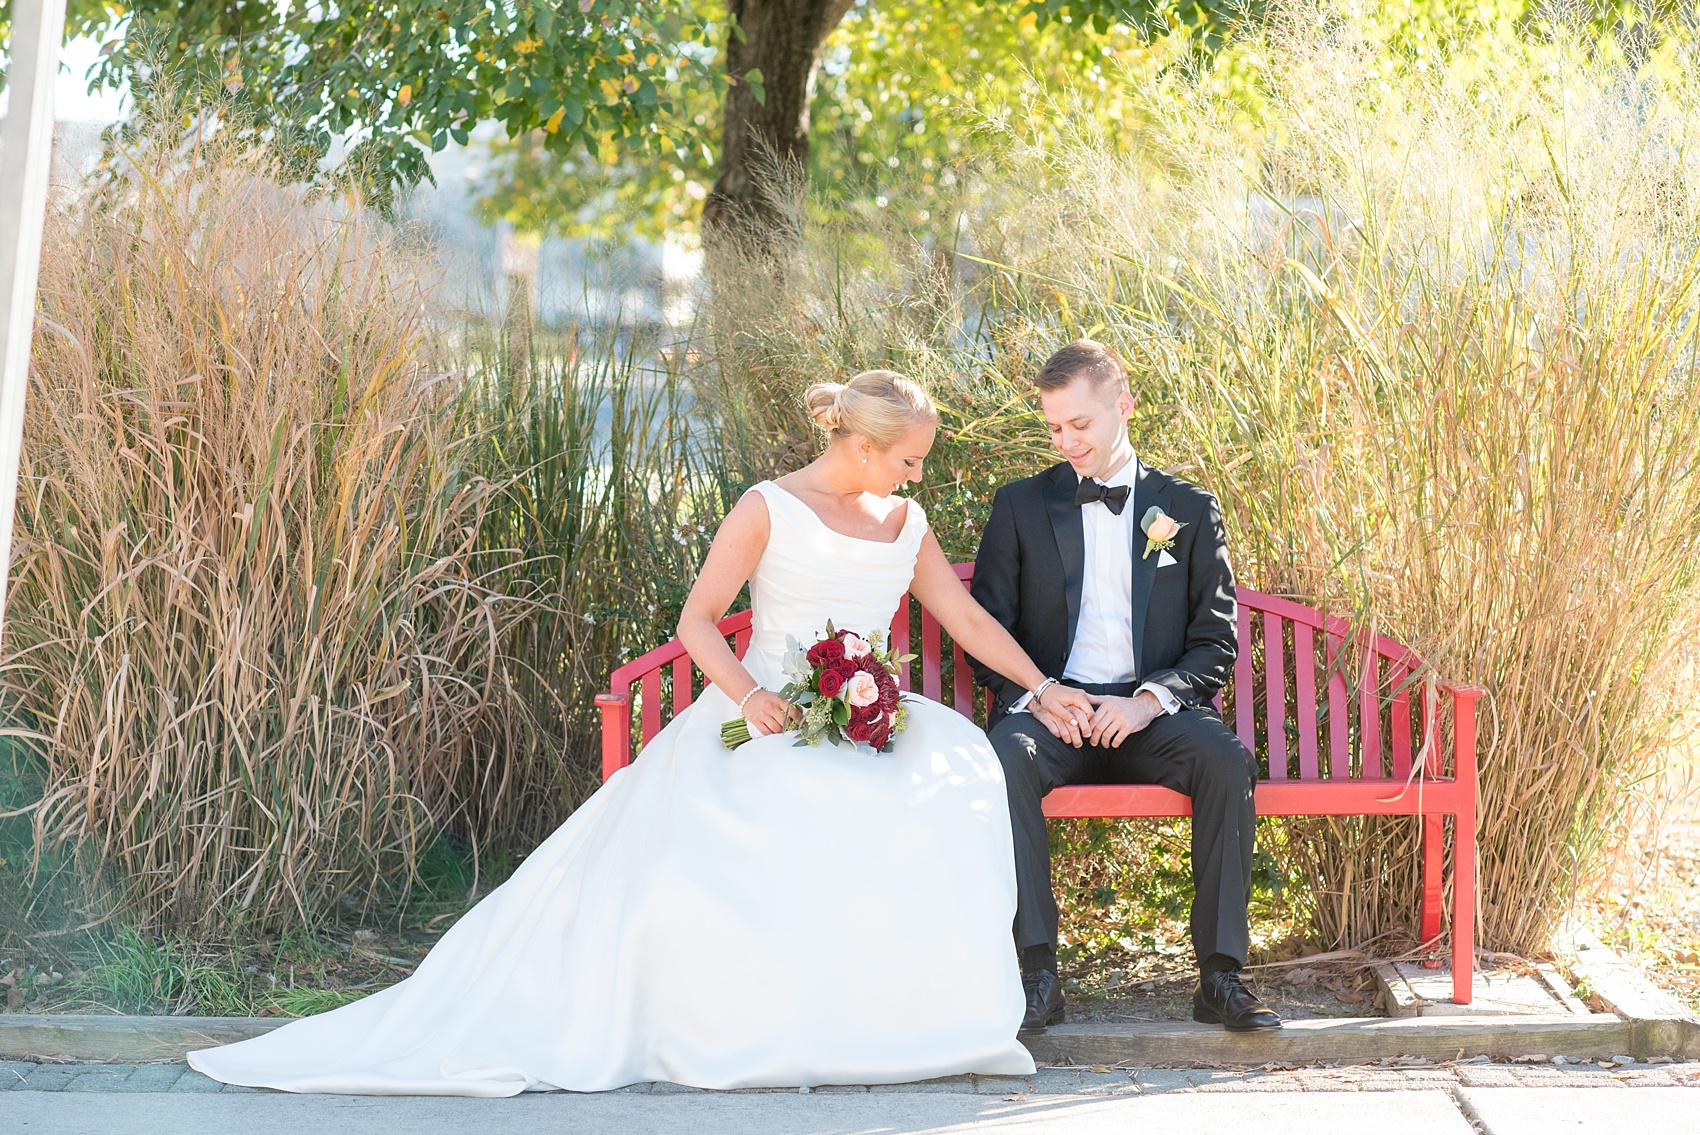 Mikkel Paige Photography photo of a wedding at The Rickhouse, North Carolina. Pictures of the bride and groom sitting amongst wild grasses in golden hour sunlight.